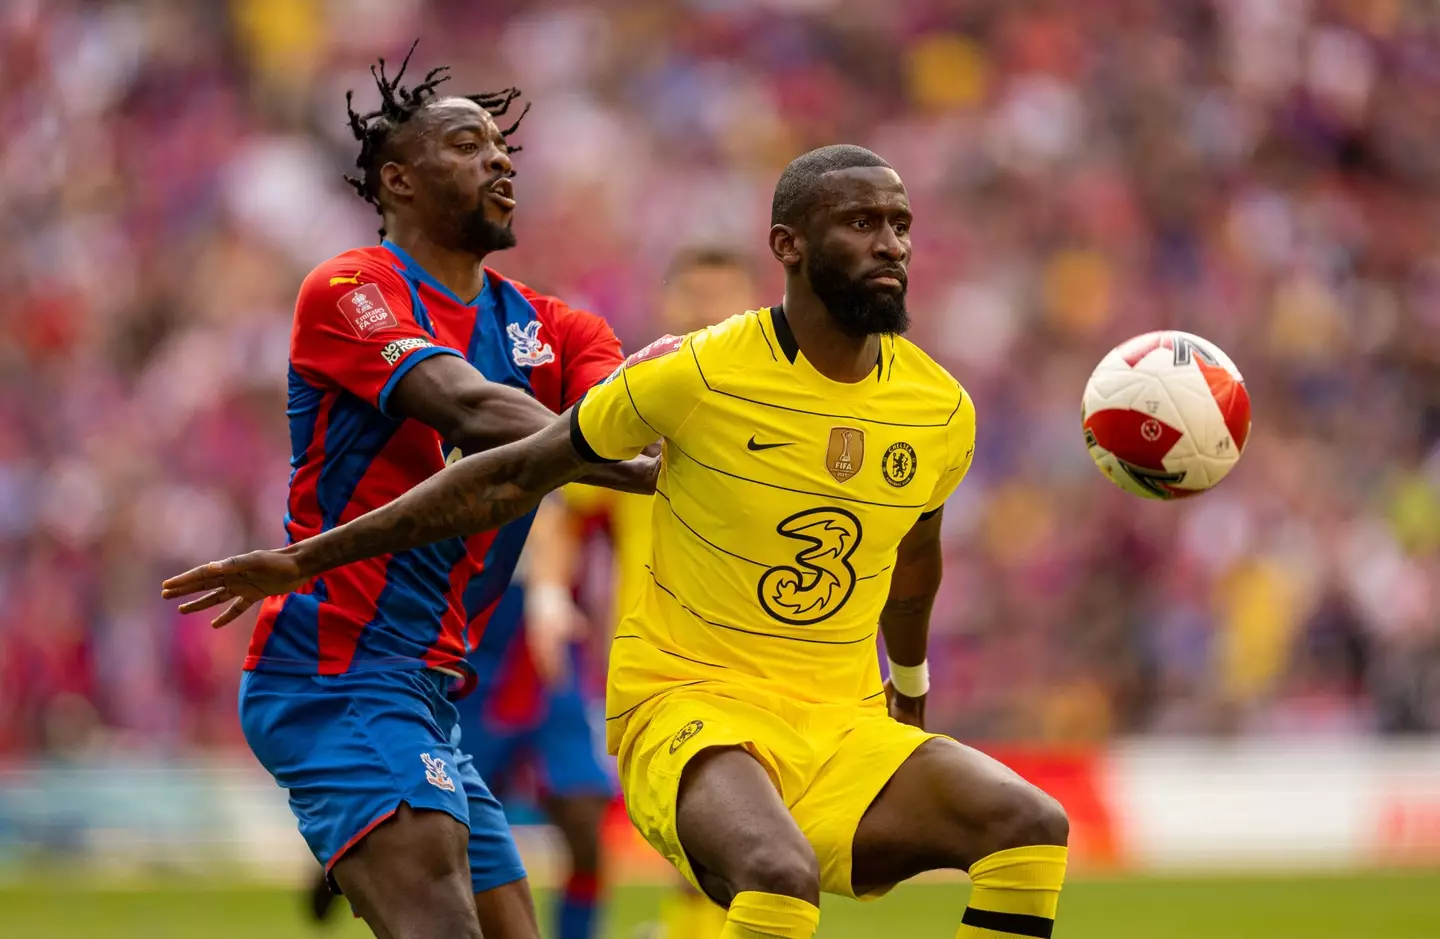 Rudiger shields the ball from Jean-Philippe Mateta during Chelsea vs Crystal Palace. (Image